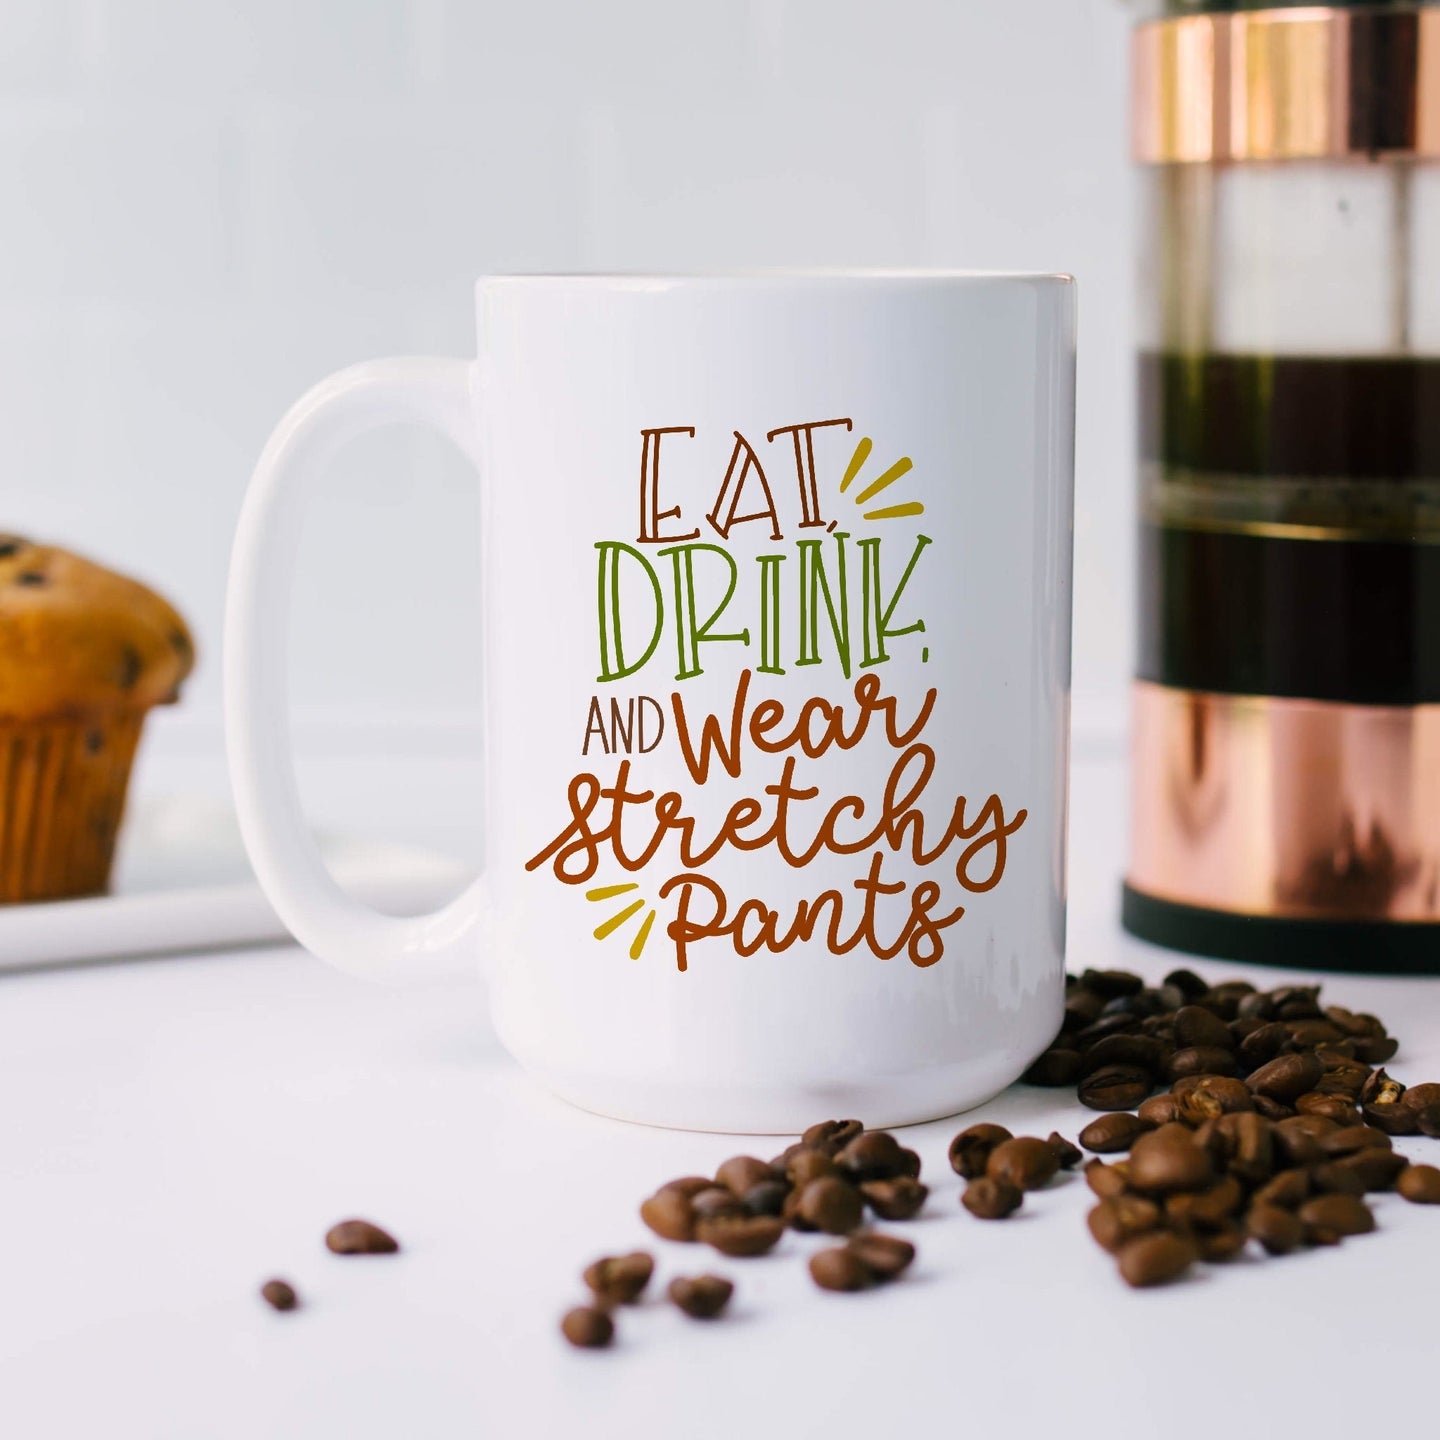 Eat Drink & Wear Stretchy Pants